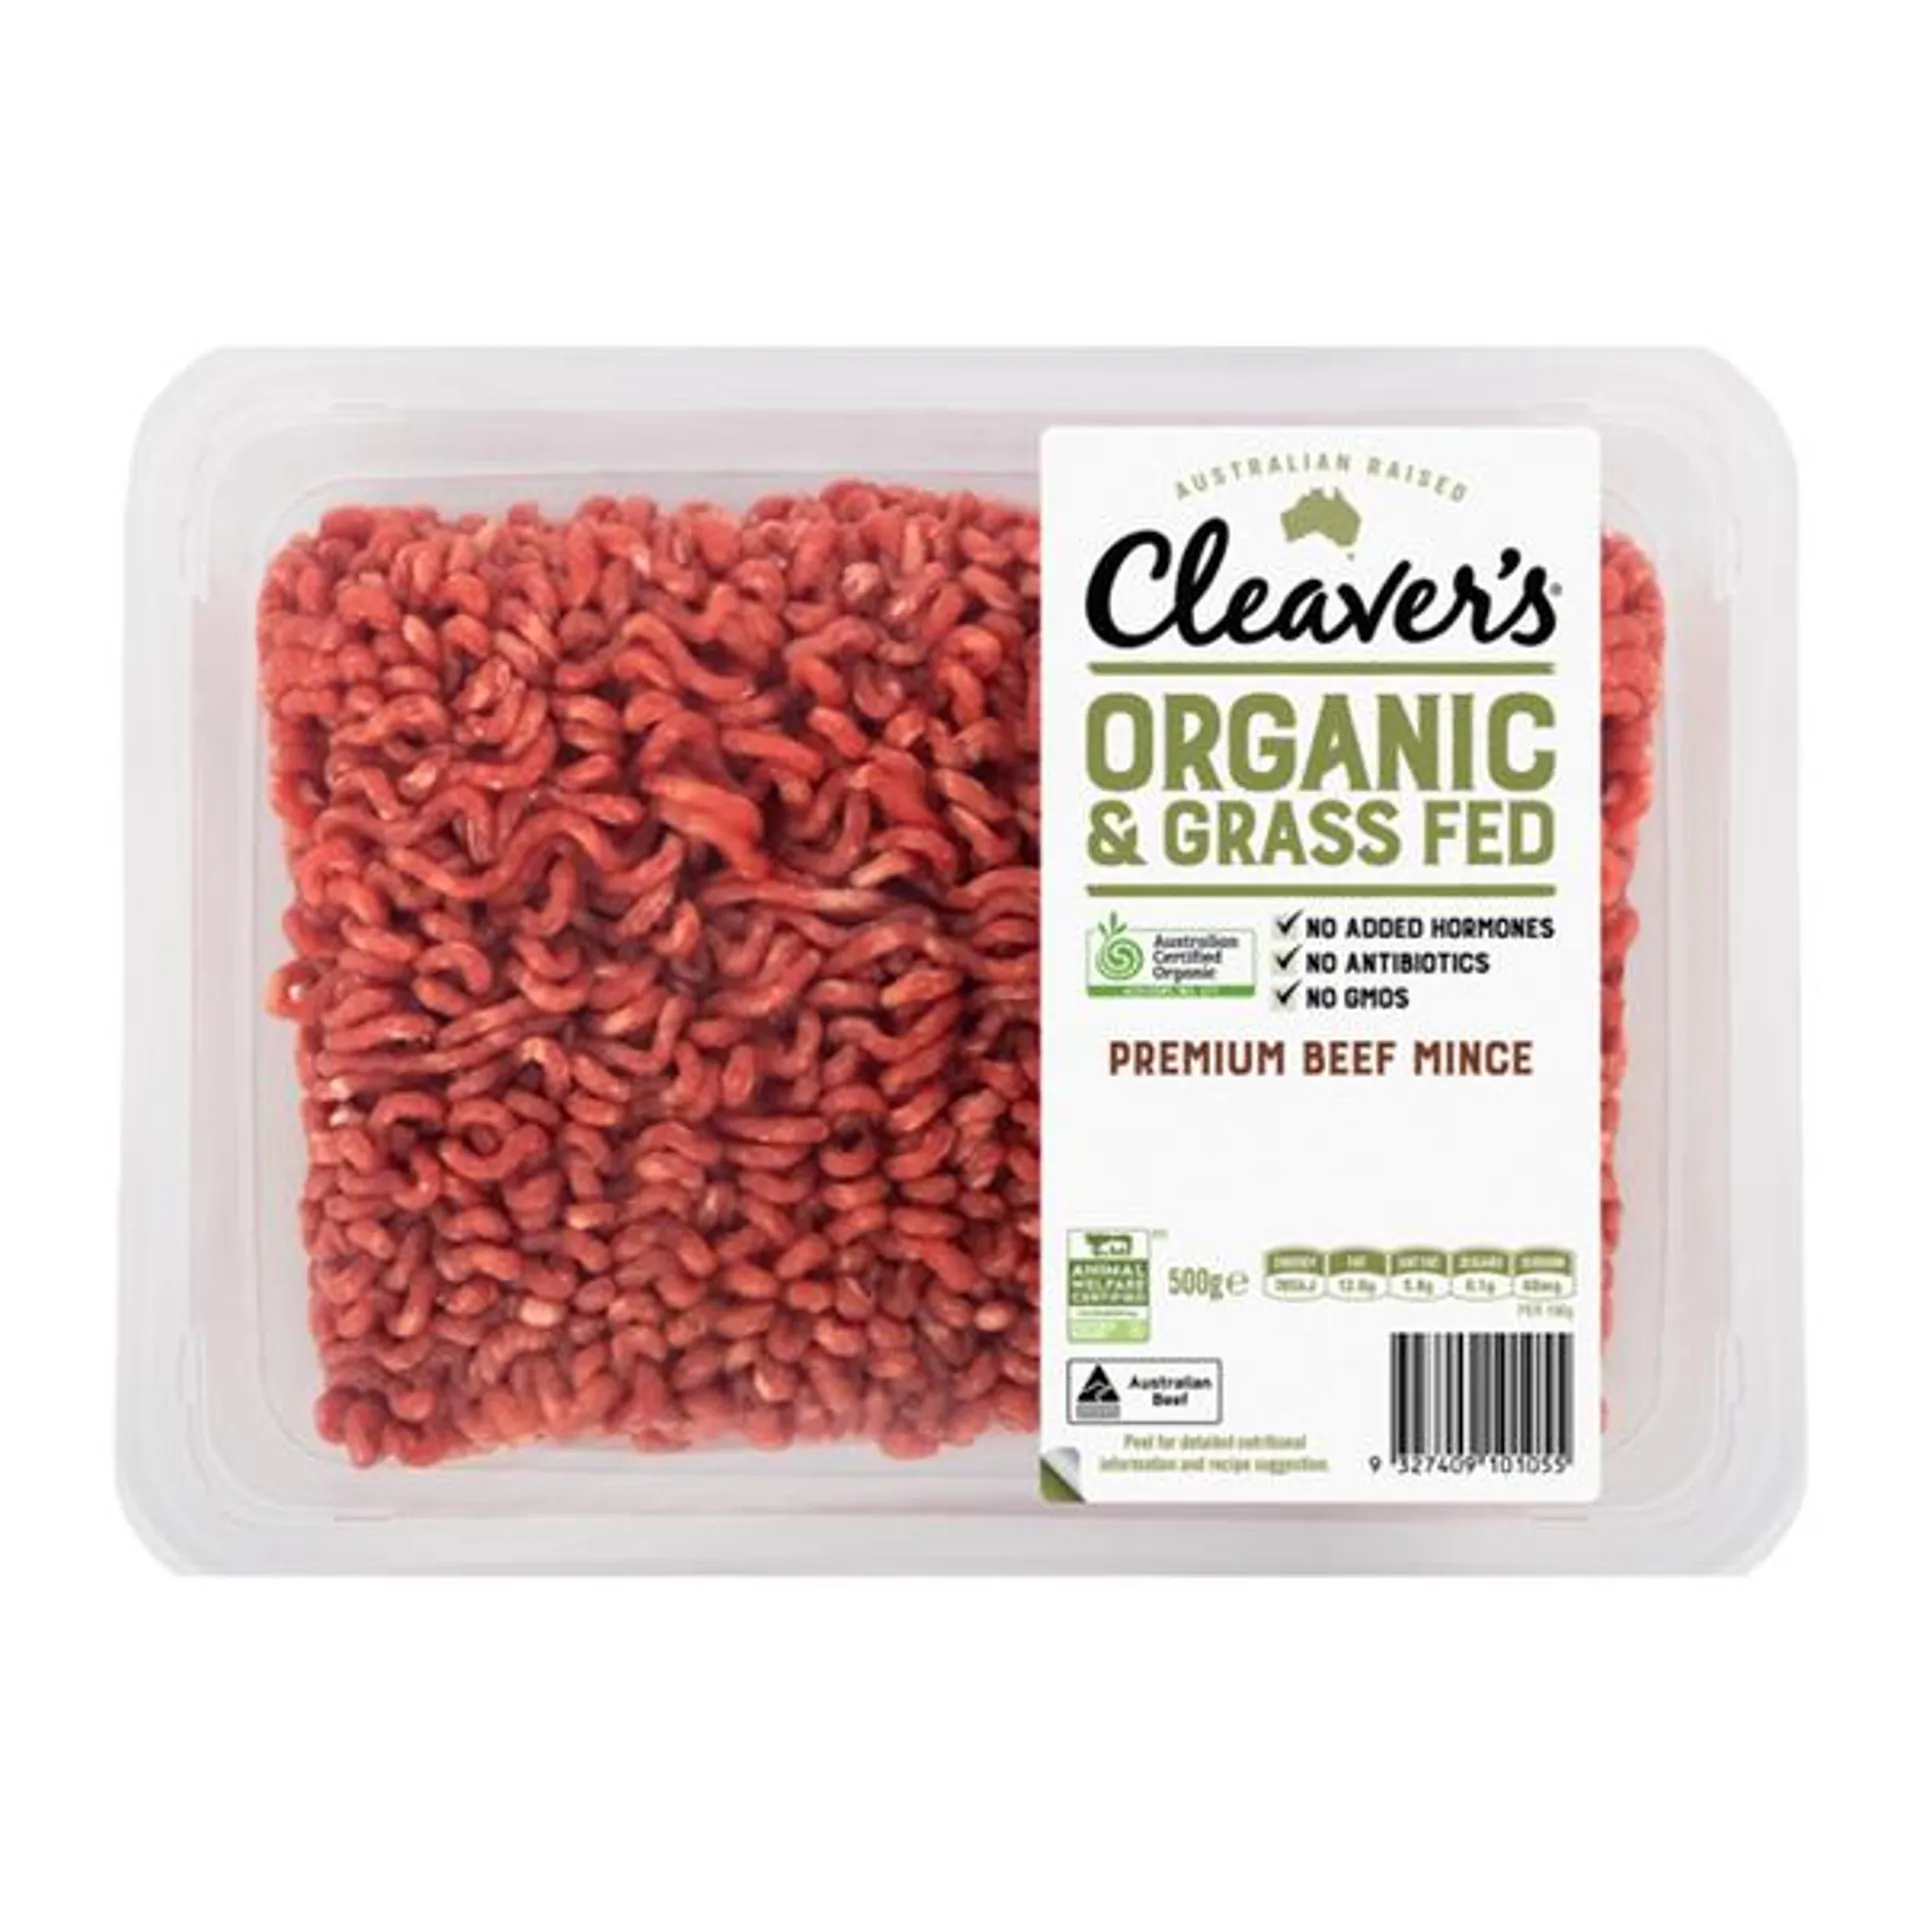 Cleaver's Organic Free Range and Grass Fed Premium Beef Mince 500g